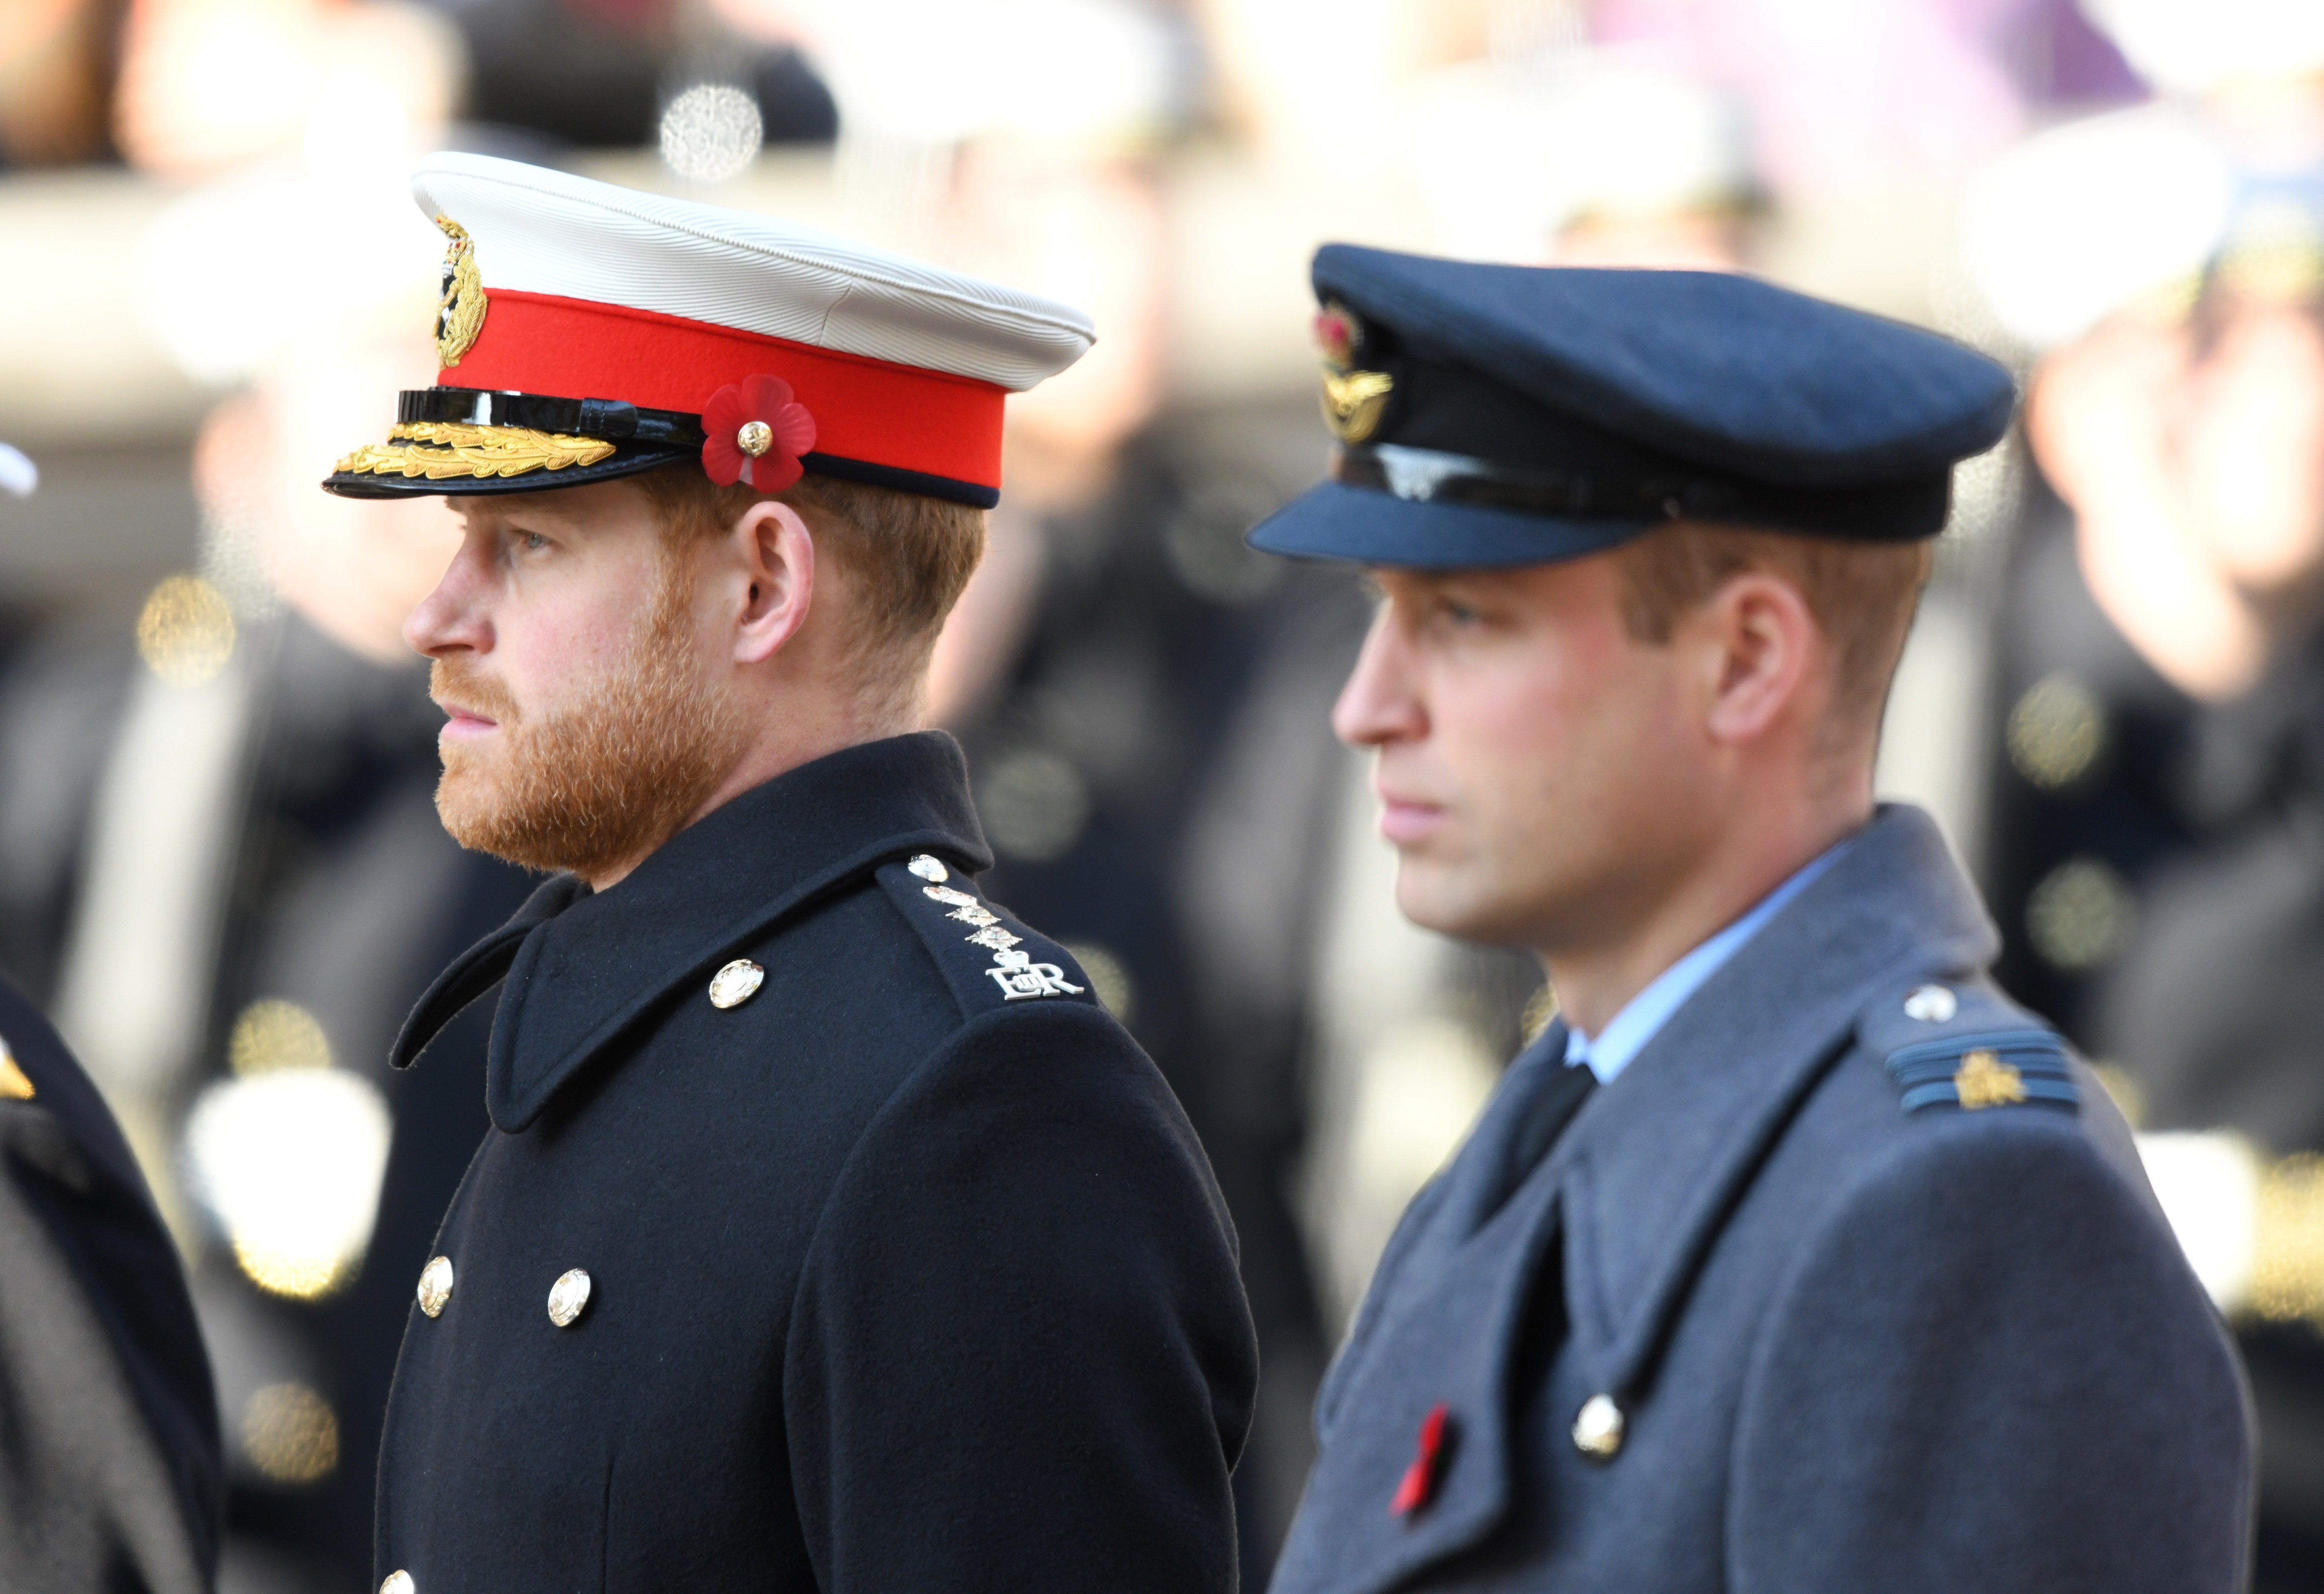 Prince Harry, Duke of Sussex and Prince William, Duke of Cambridge attend the annual Remembrance Sunday memorial at The Cenotaph on November 10, 2019 in London, England. | Source: Getty Images